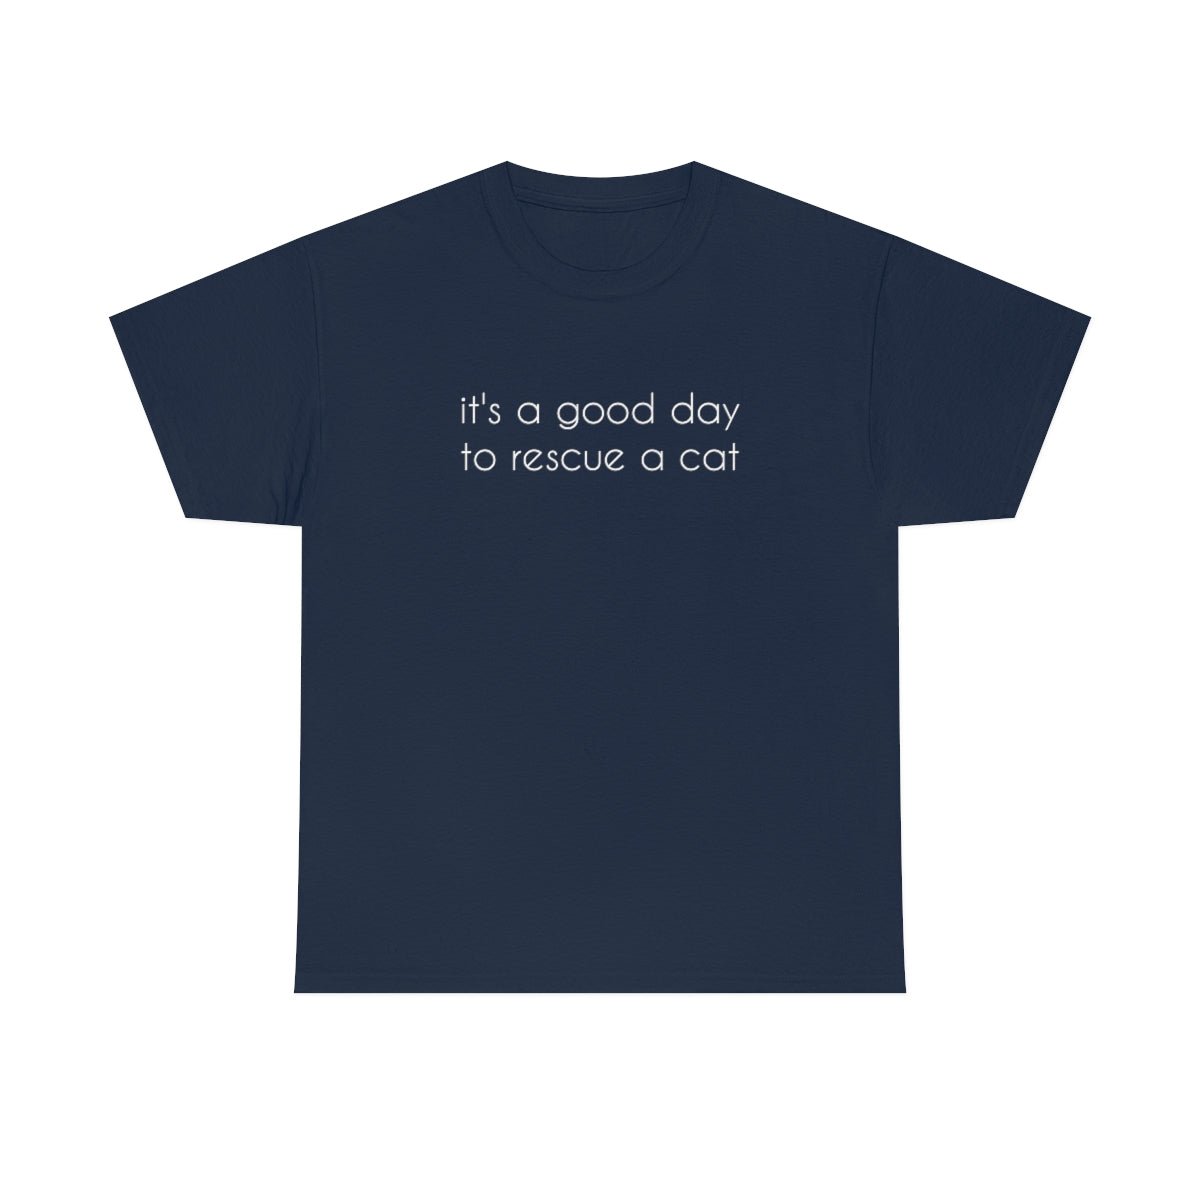 It's A Good Day To Rescue A Cat | Text Tees - Detezi Designs-19591660849429211960